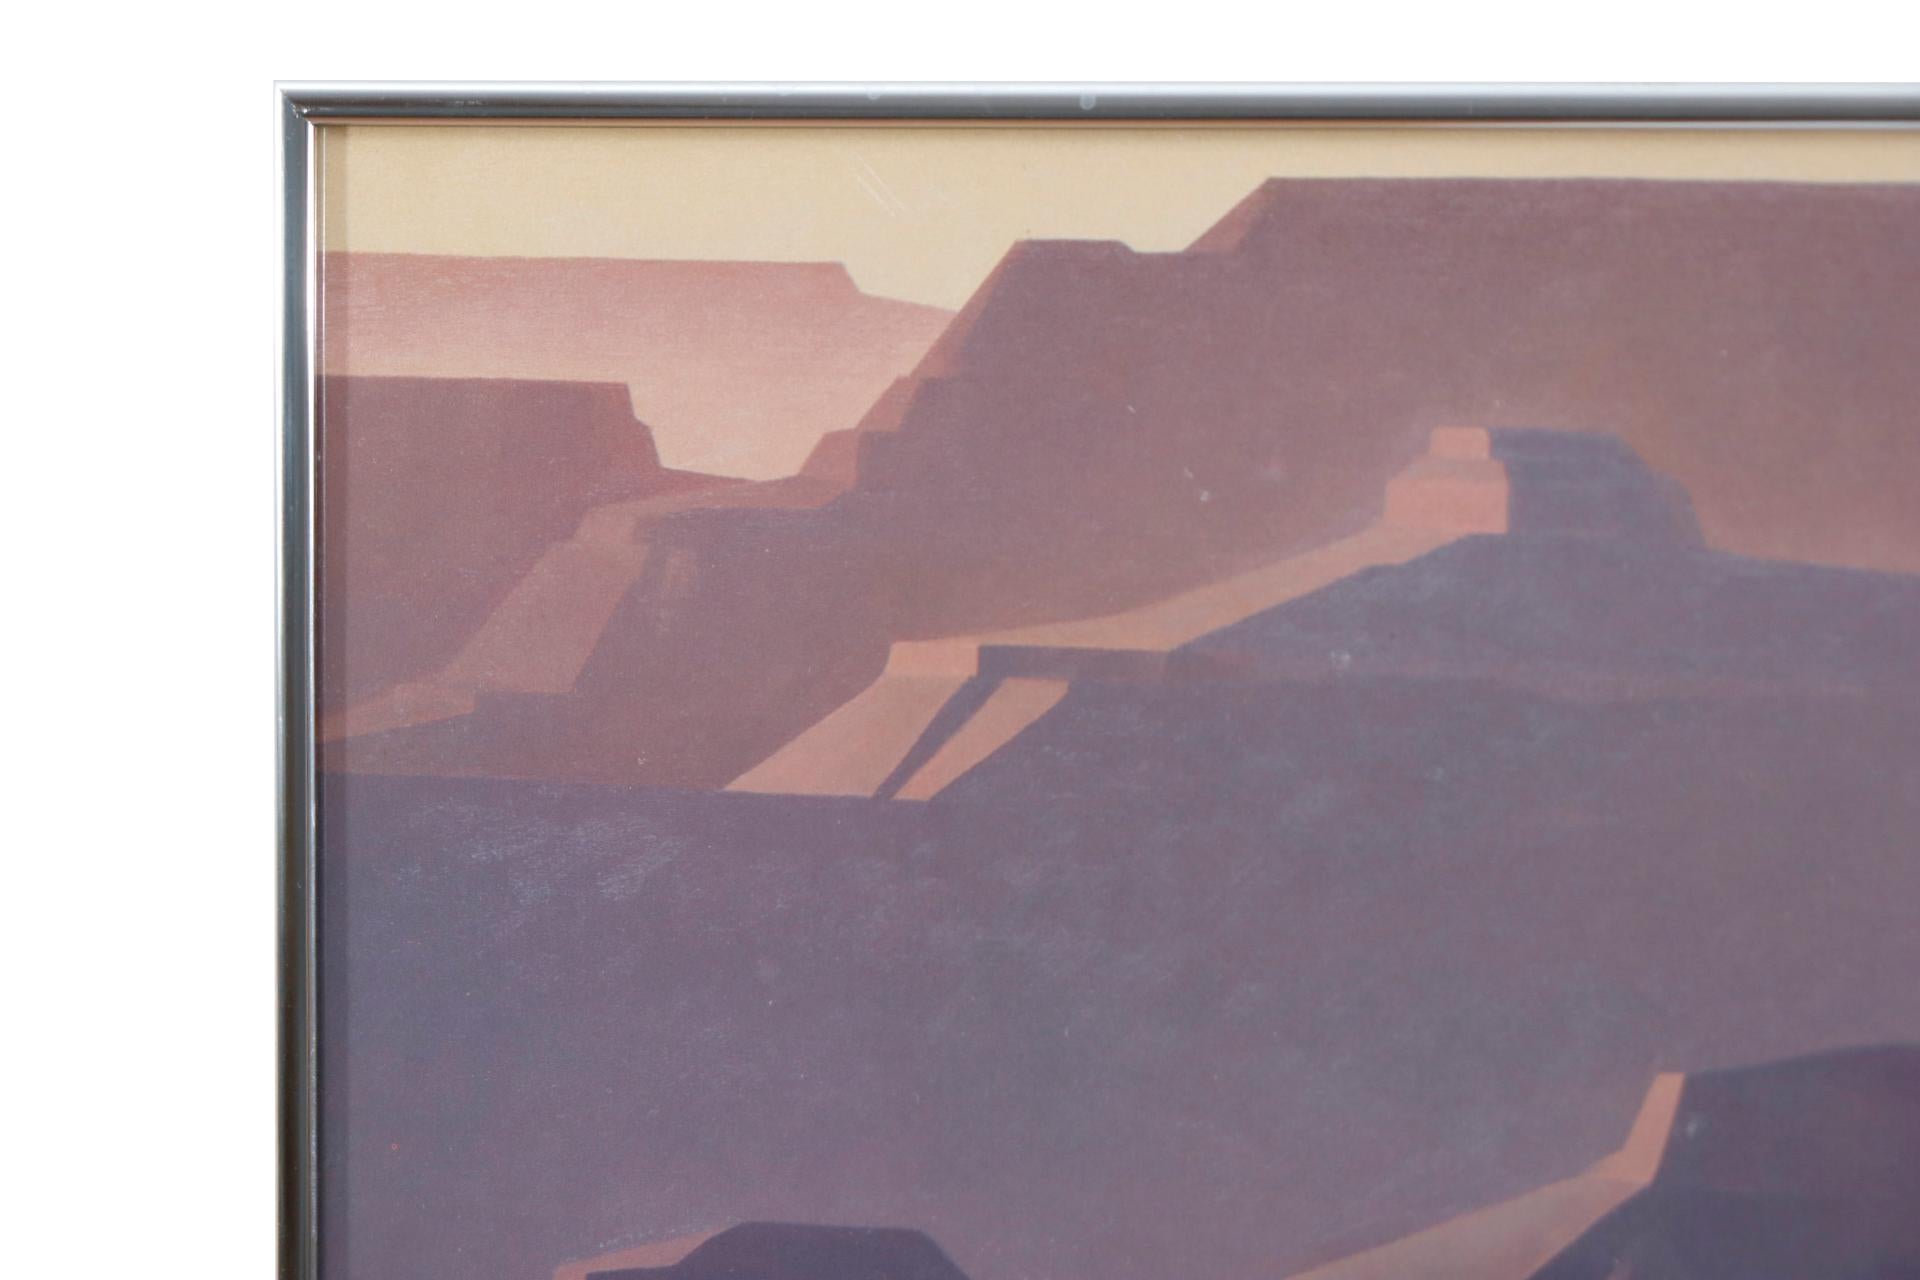 An original lithograph poster for the Grand Canyon Chamber Music Festival, promoting their second season in September 1985. Above, is a print of a painting of the Grand Canyon by Ed Mell in purple hues. Below, purple text over a taupe background